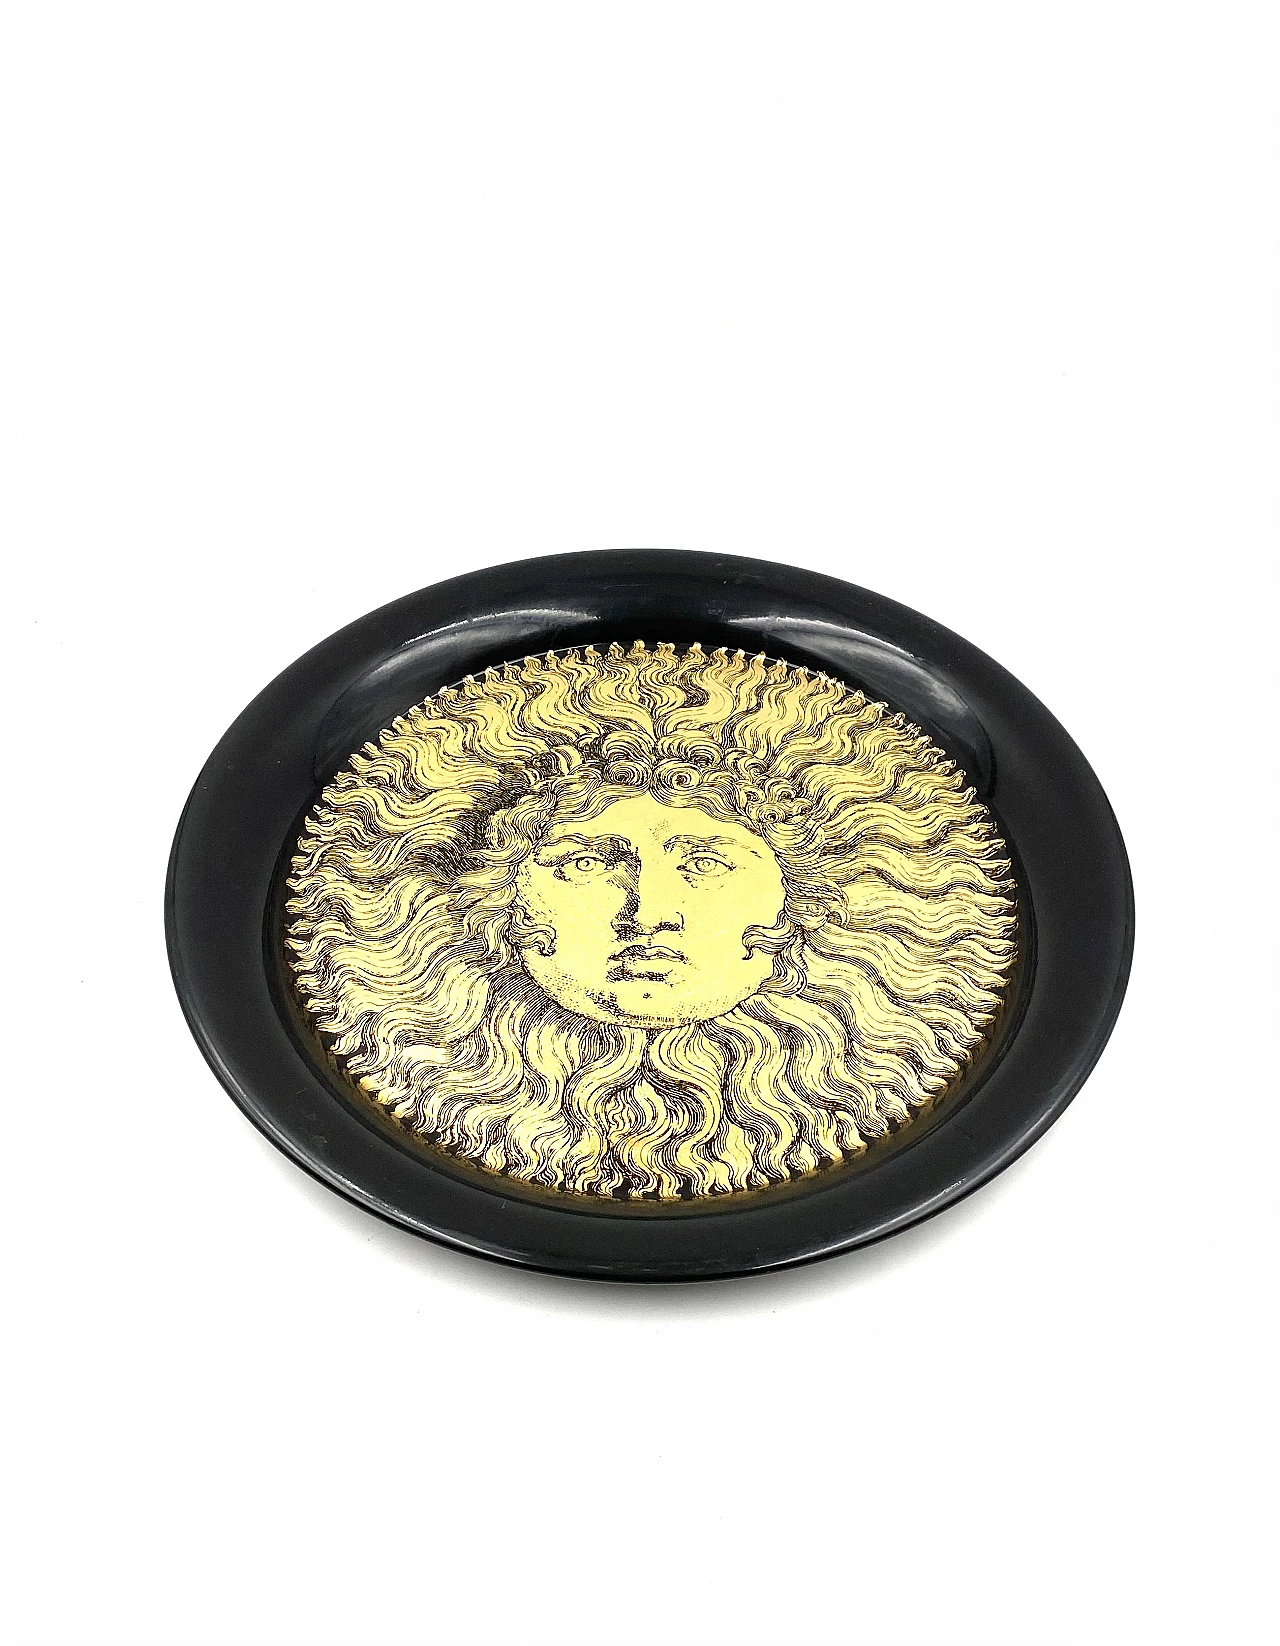 Metal Re Sole tray by Piero Fornasetti, 1950s 12